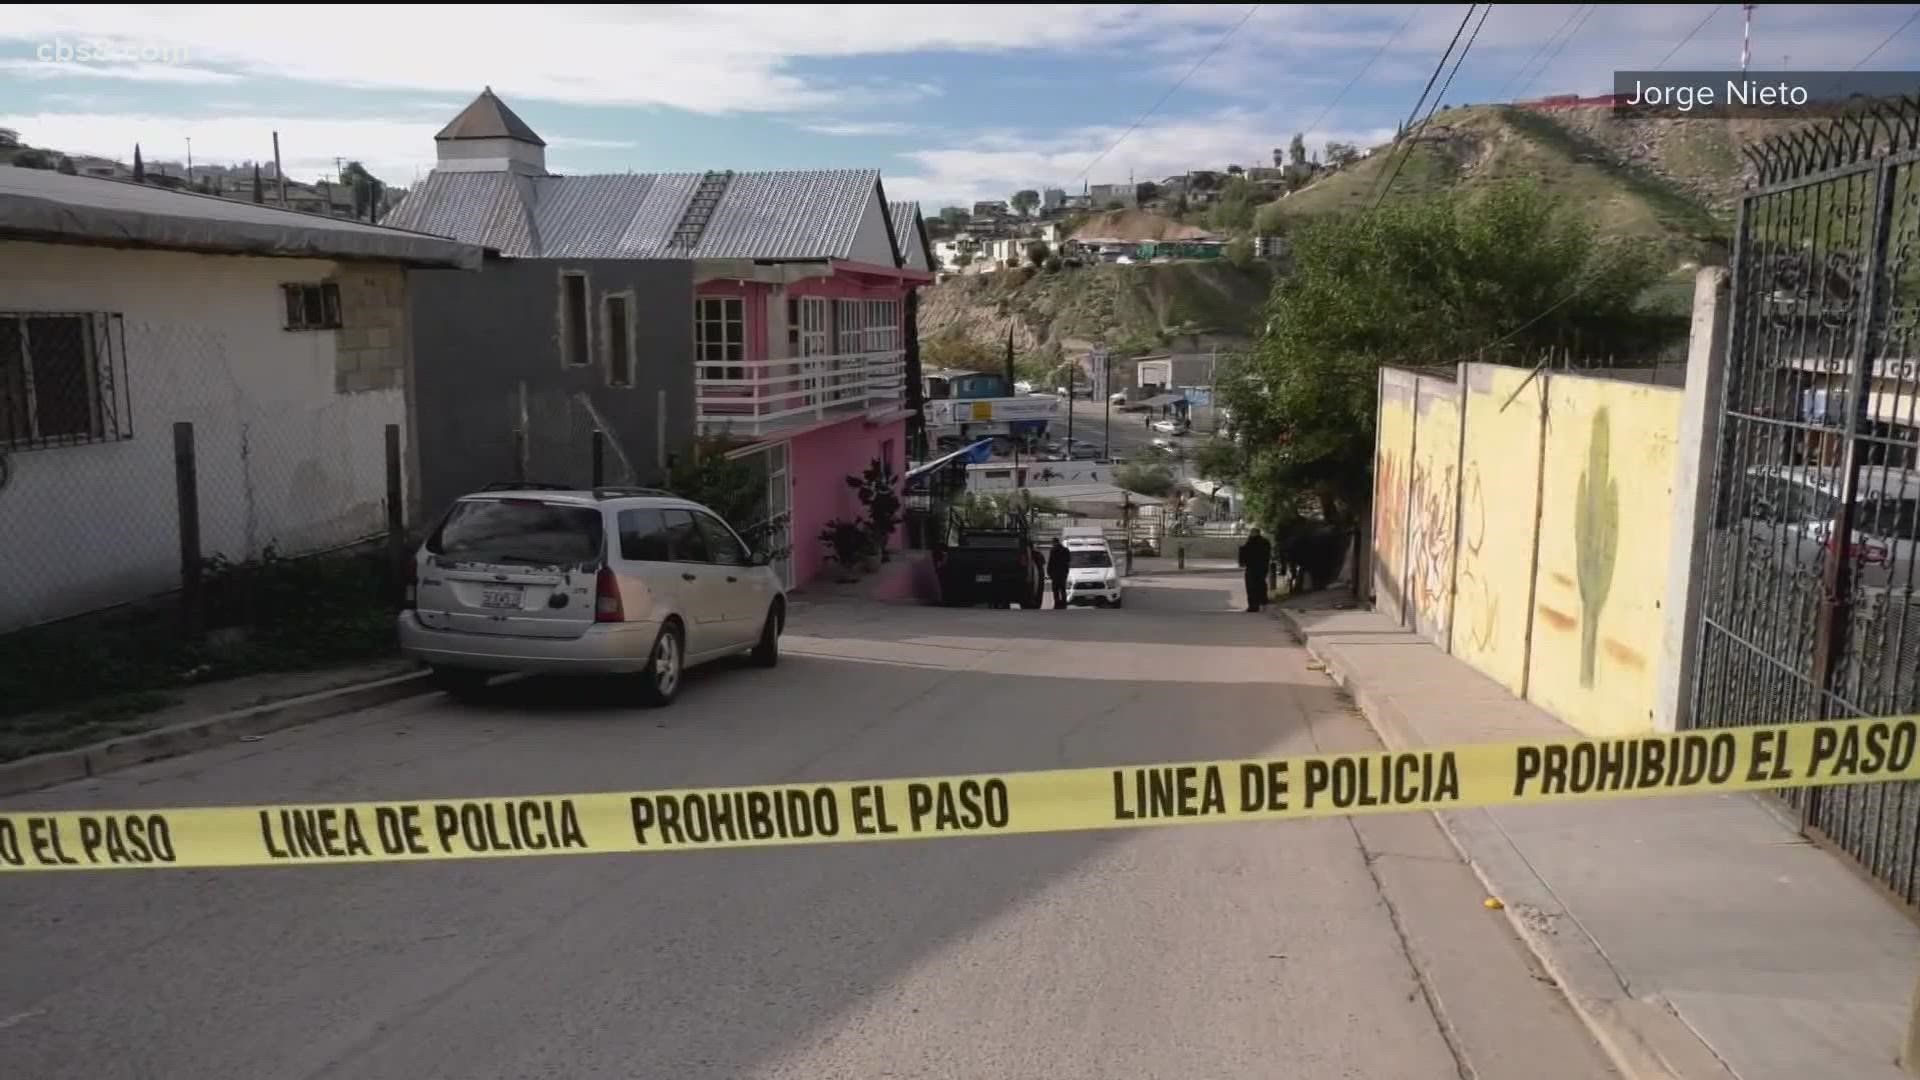 On Wednesday, three suspects were arrested for the murder of Tijuana journalist.